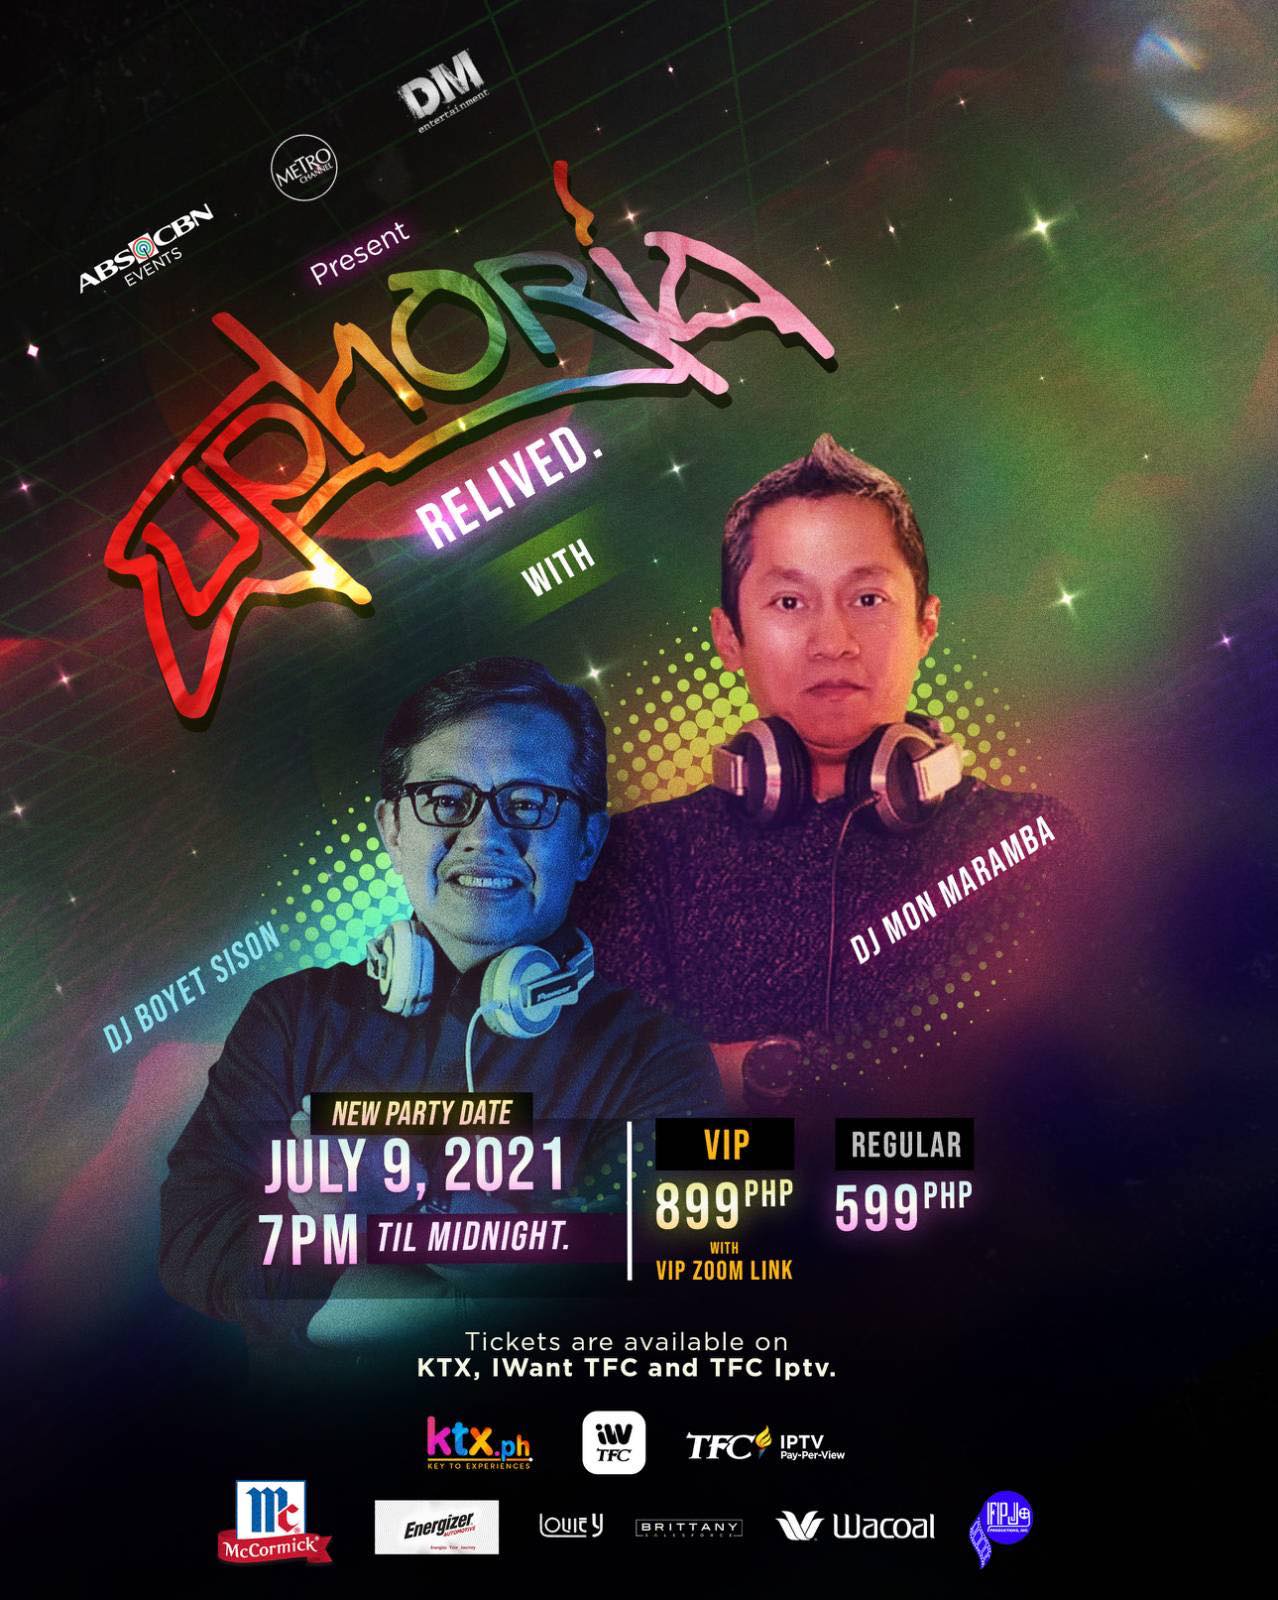 Euphoria Relived is happening on July 9